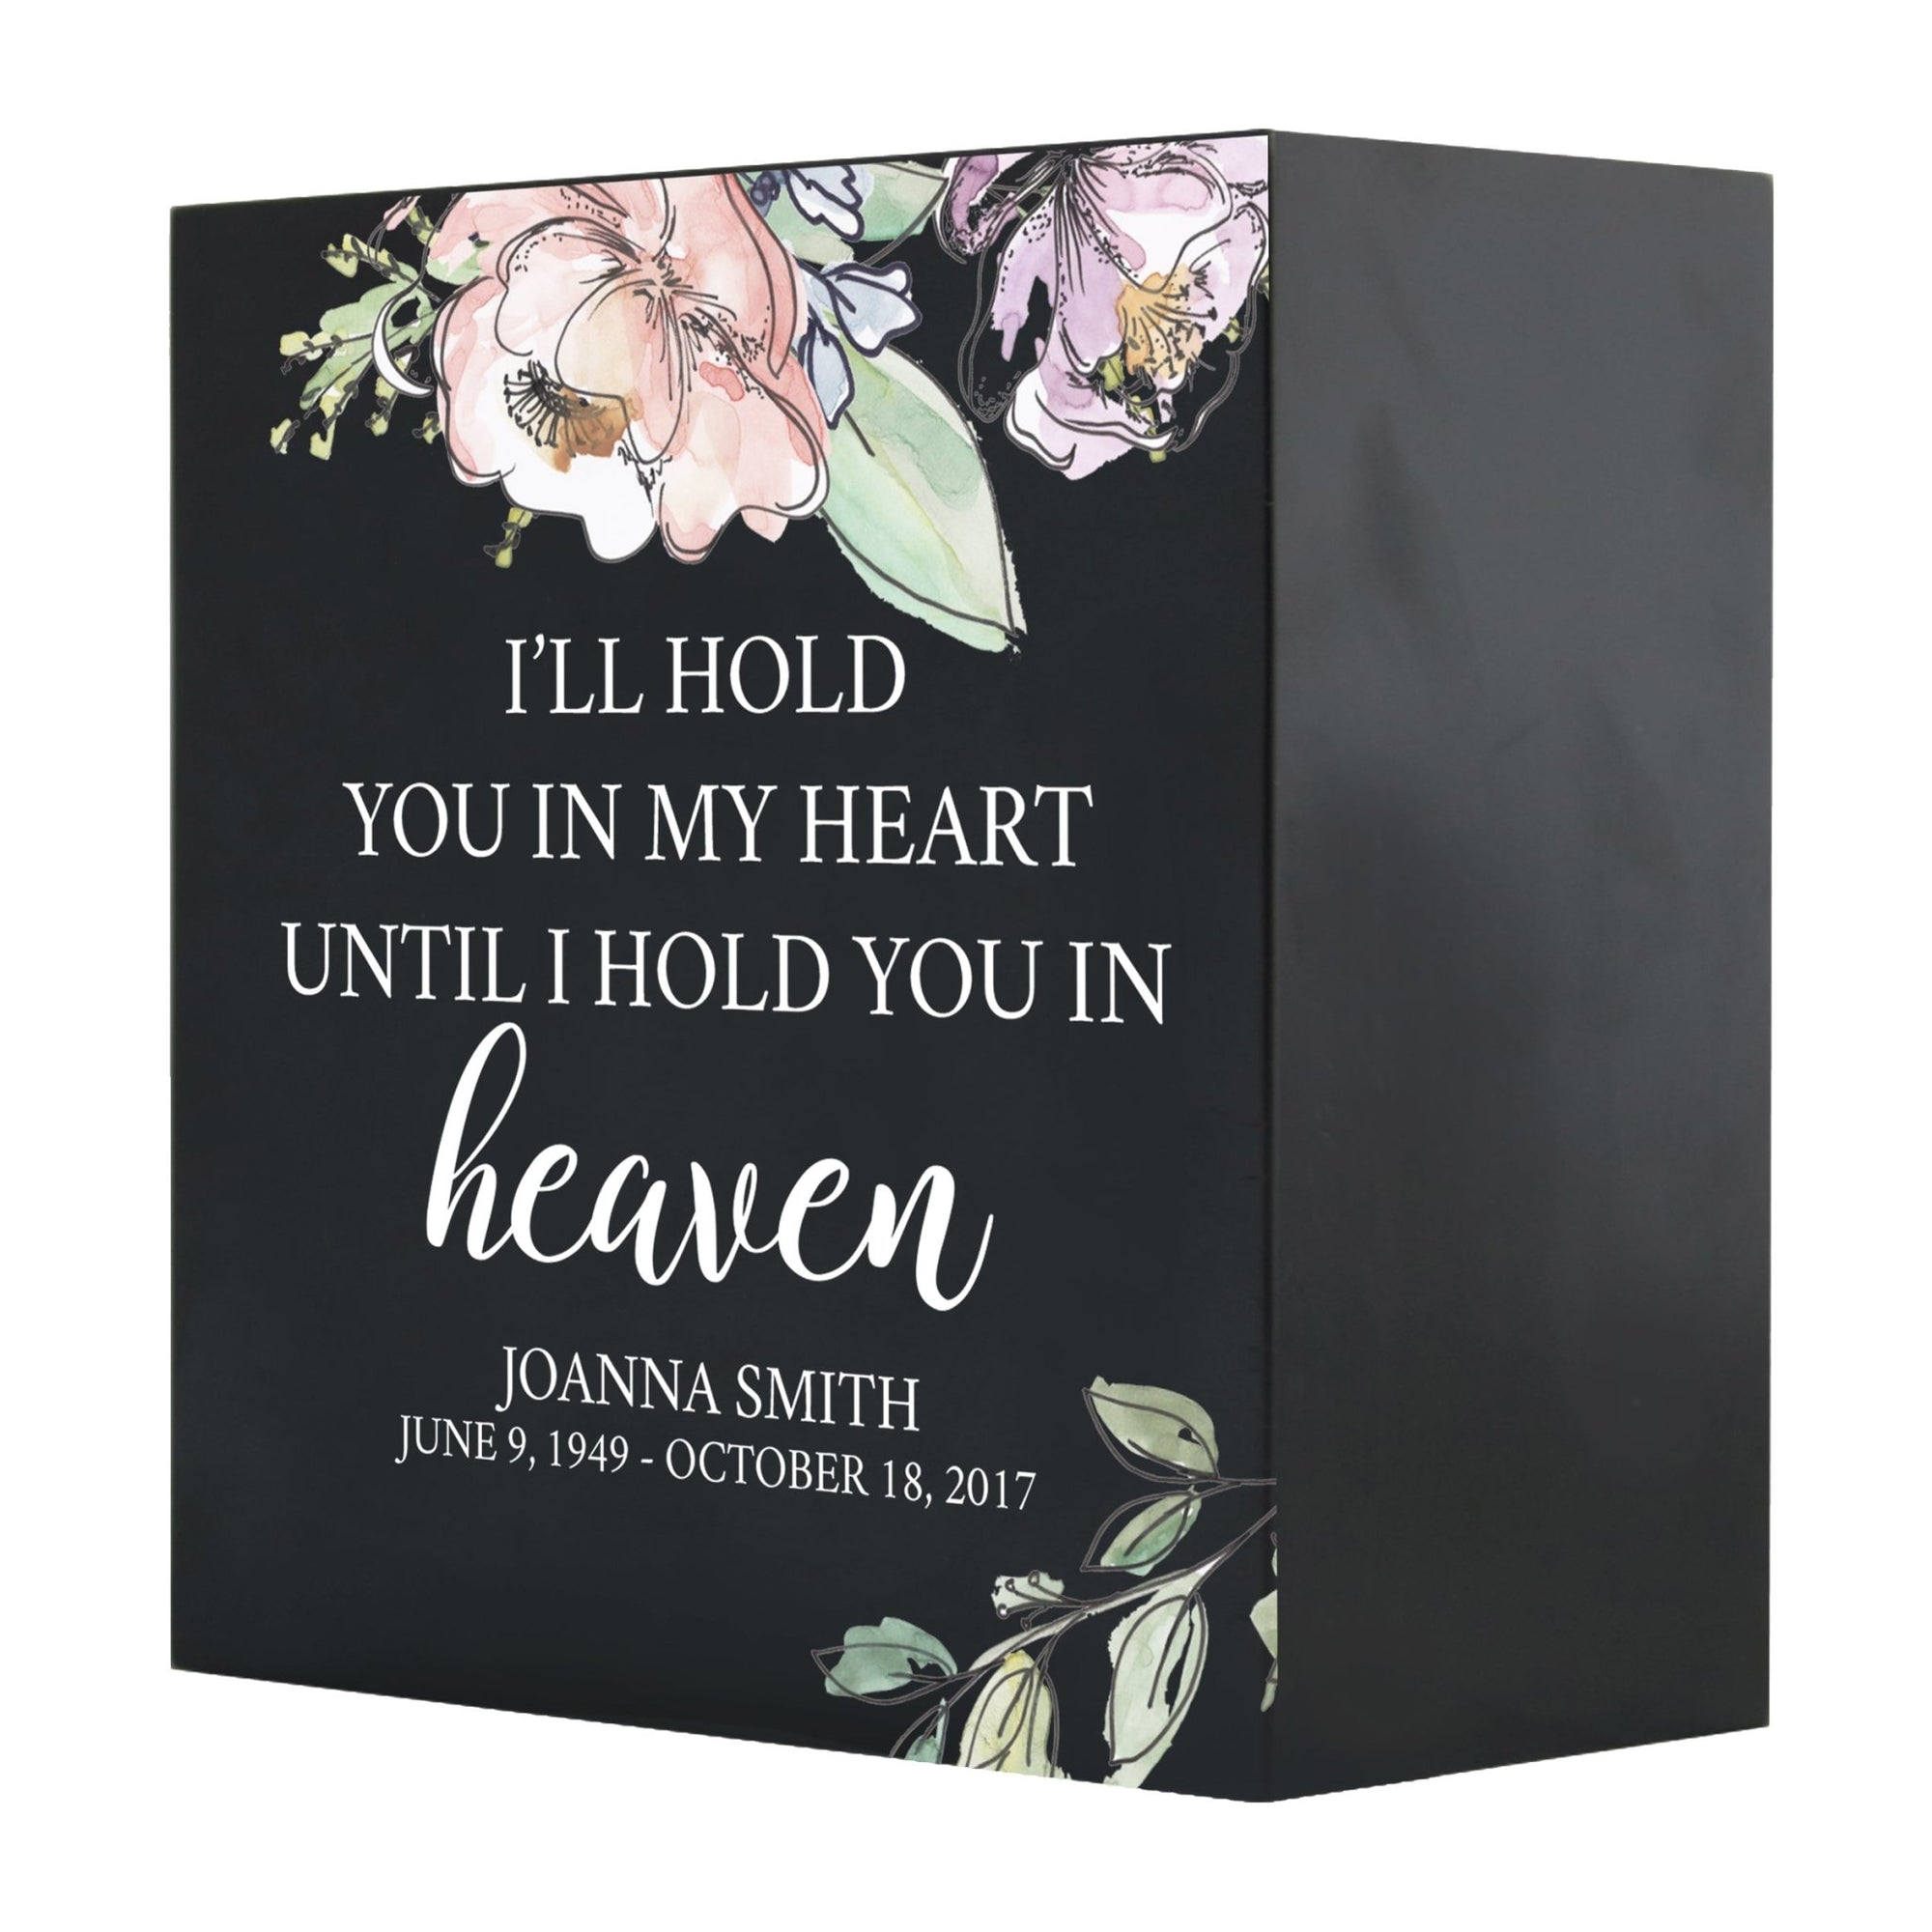 Personalized Modern Inspirational Memorial Wooden Shadow Box and Urn 6x6 holds 53 cu in of Human Ashes - I’ll Hold You (Heart) - LifeSong Milestones